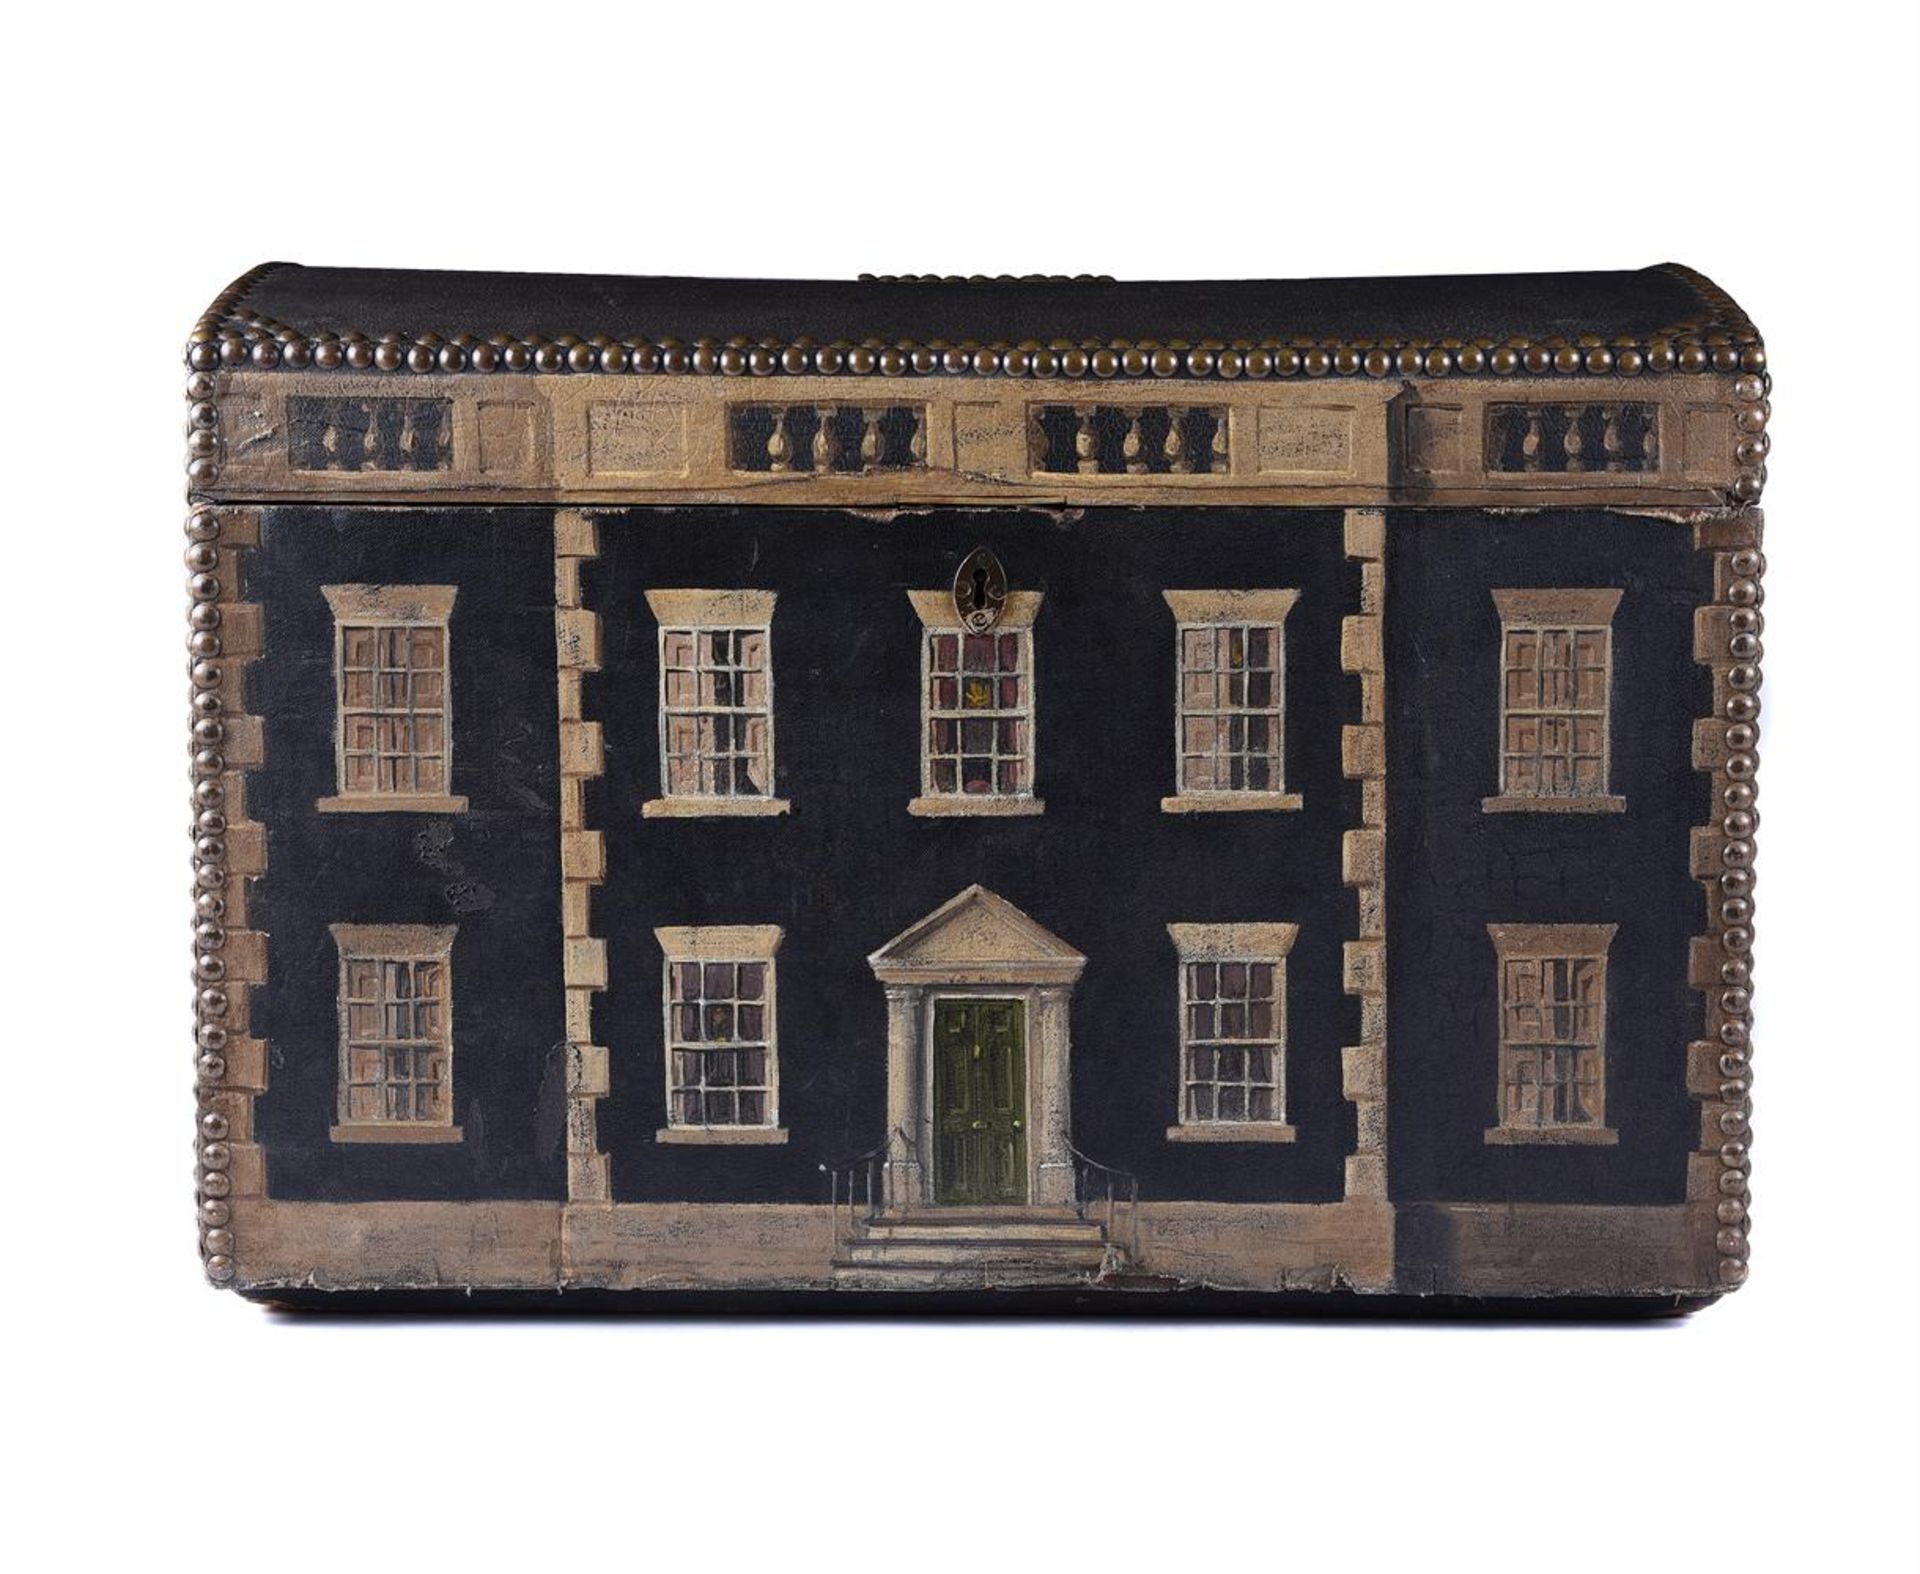 AN UNUSUAL PAINTED 'COUNTRY HOUSE' BOX OR TRUNK, LATE 18TH/EARLY 19TH CENTURY AND LATER